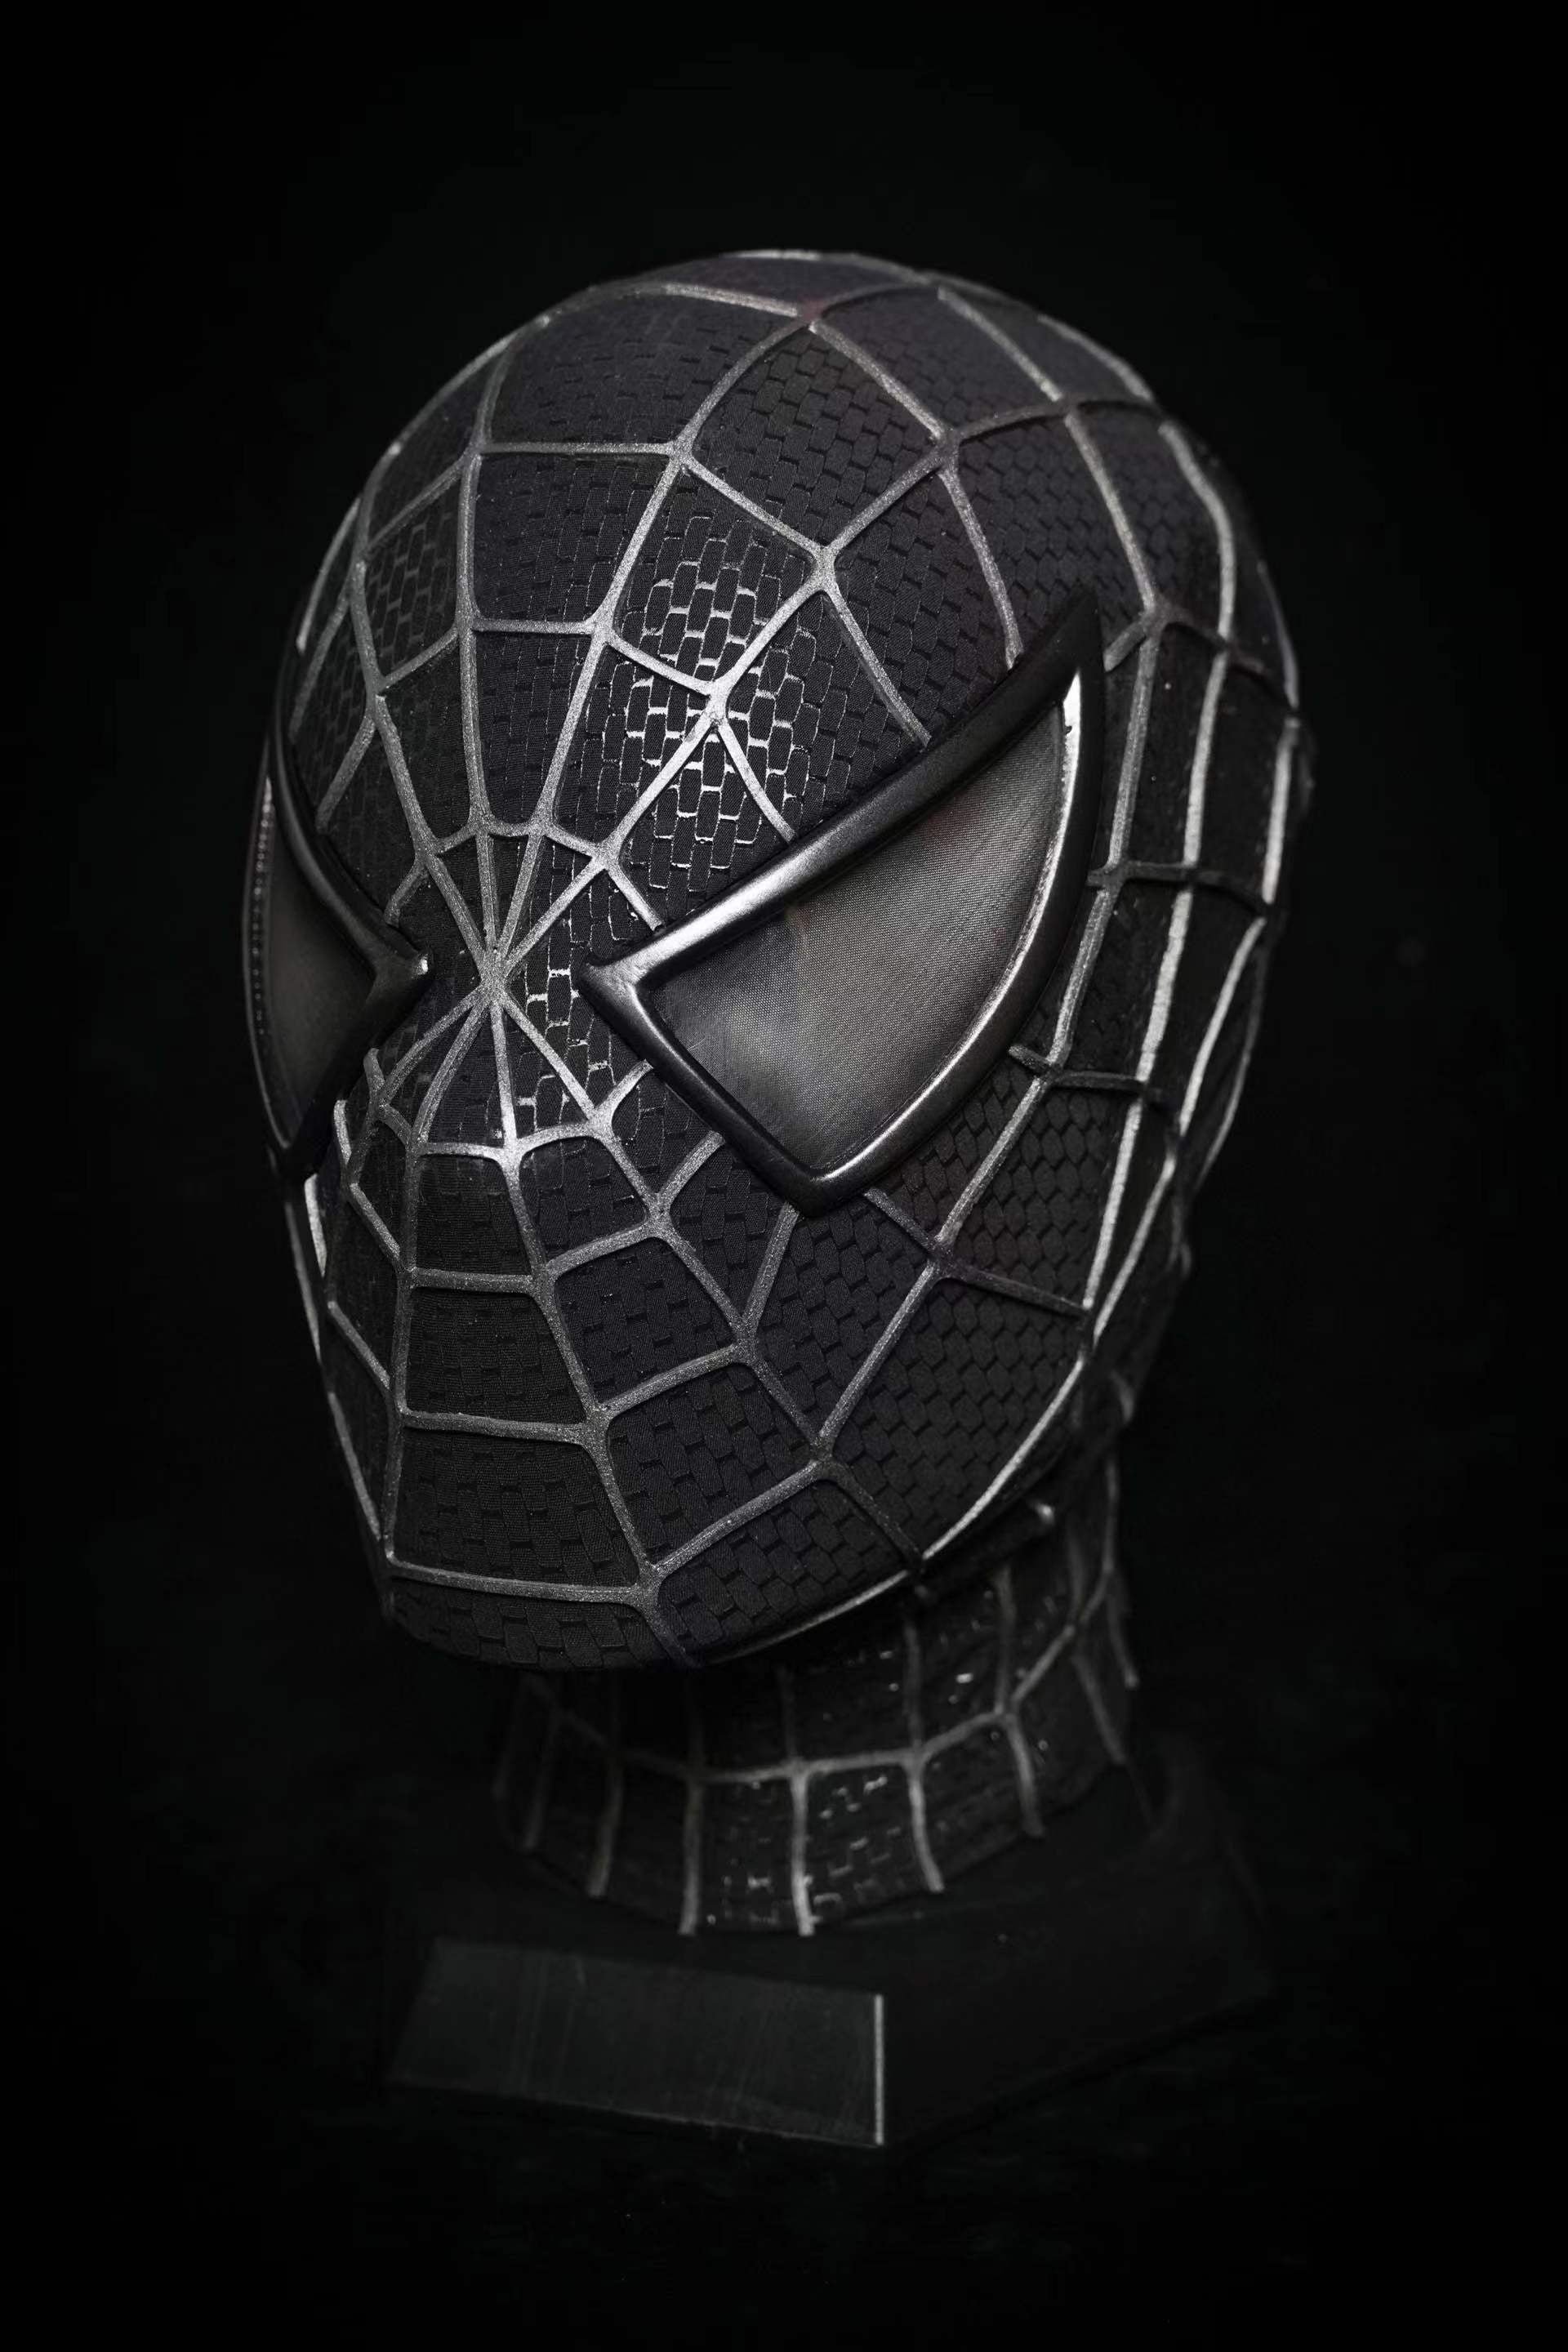 Sam Raimi Spidey3 venom mask (Adults) with Face shell & 3D Rubber Web, Wearable Movie Prop Replica